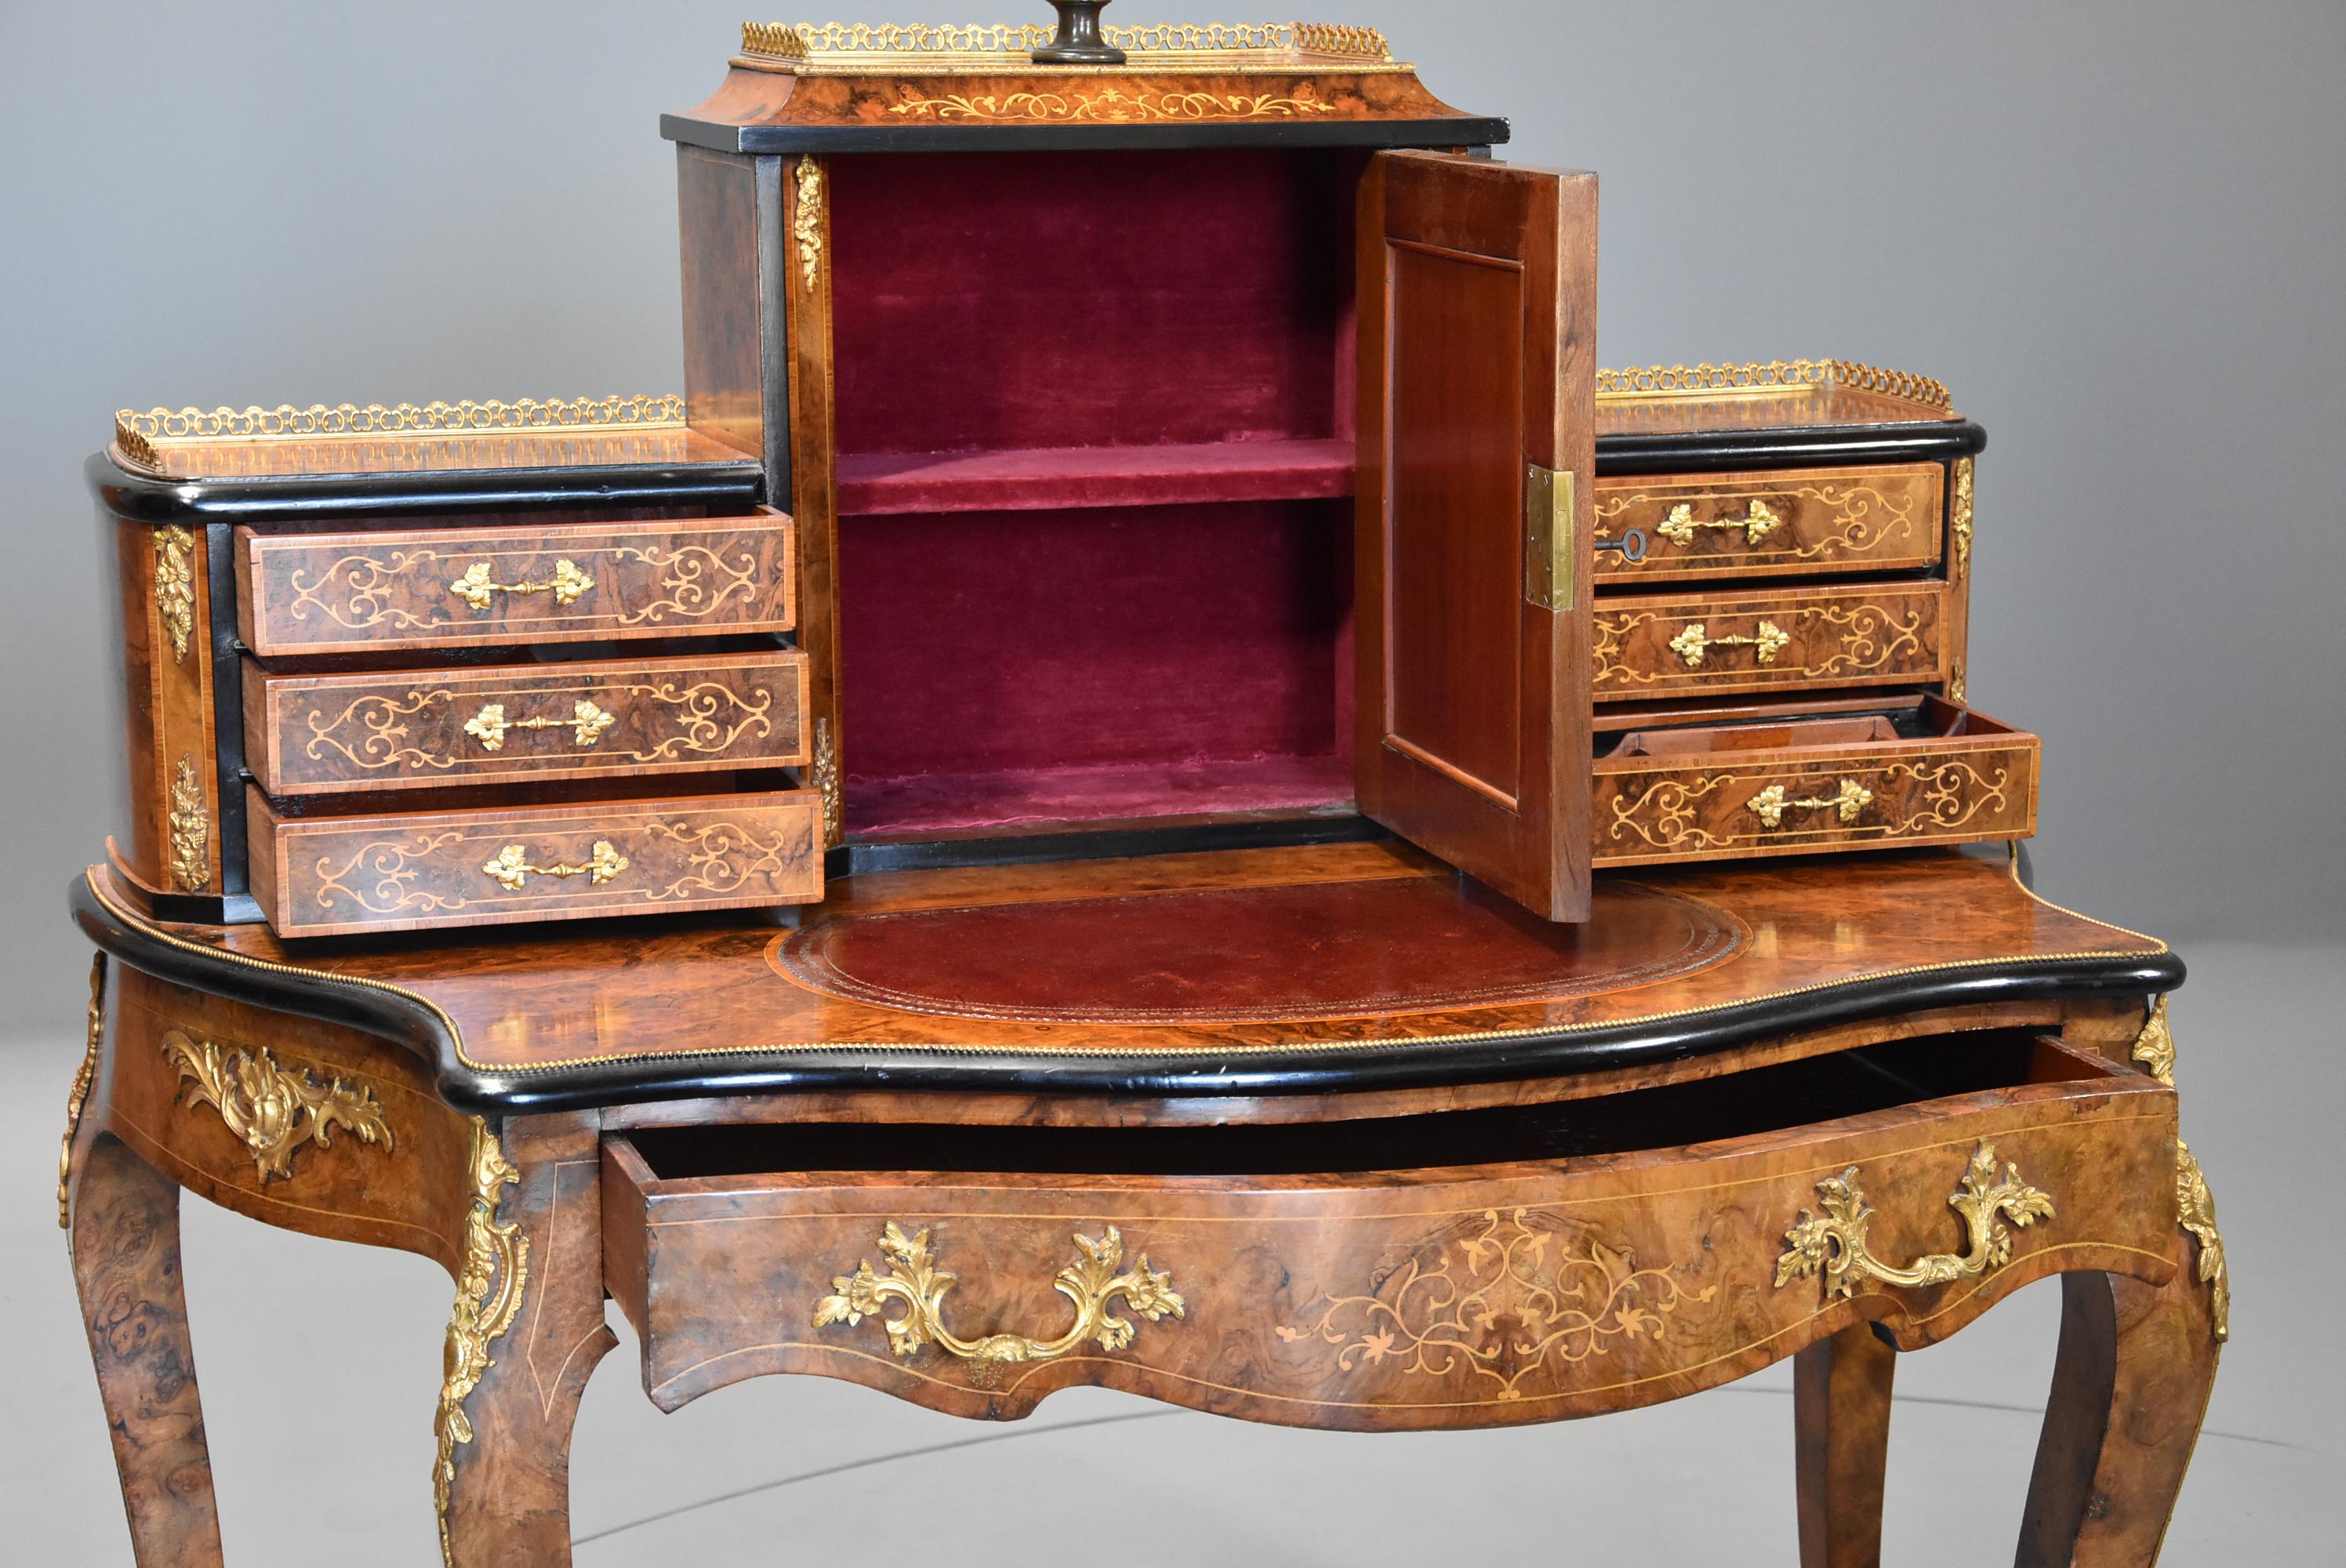 Mid-19th Century Fine Quality Burr Walnut Bonheur de Jour in the French Style For Sale 6